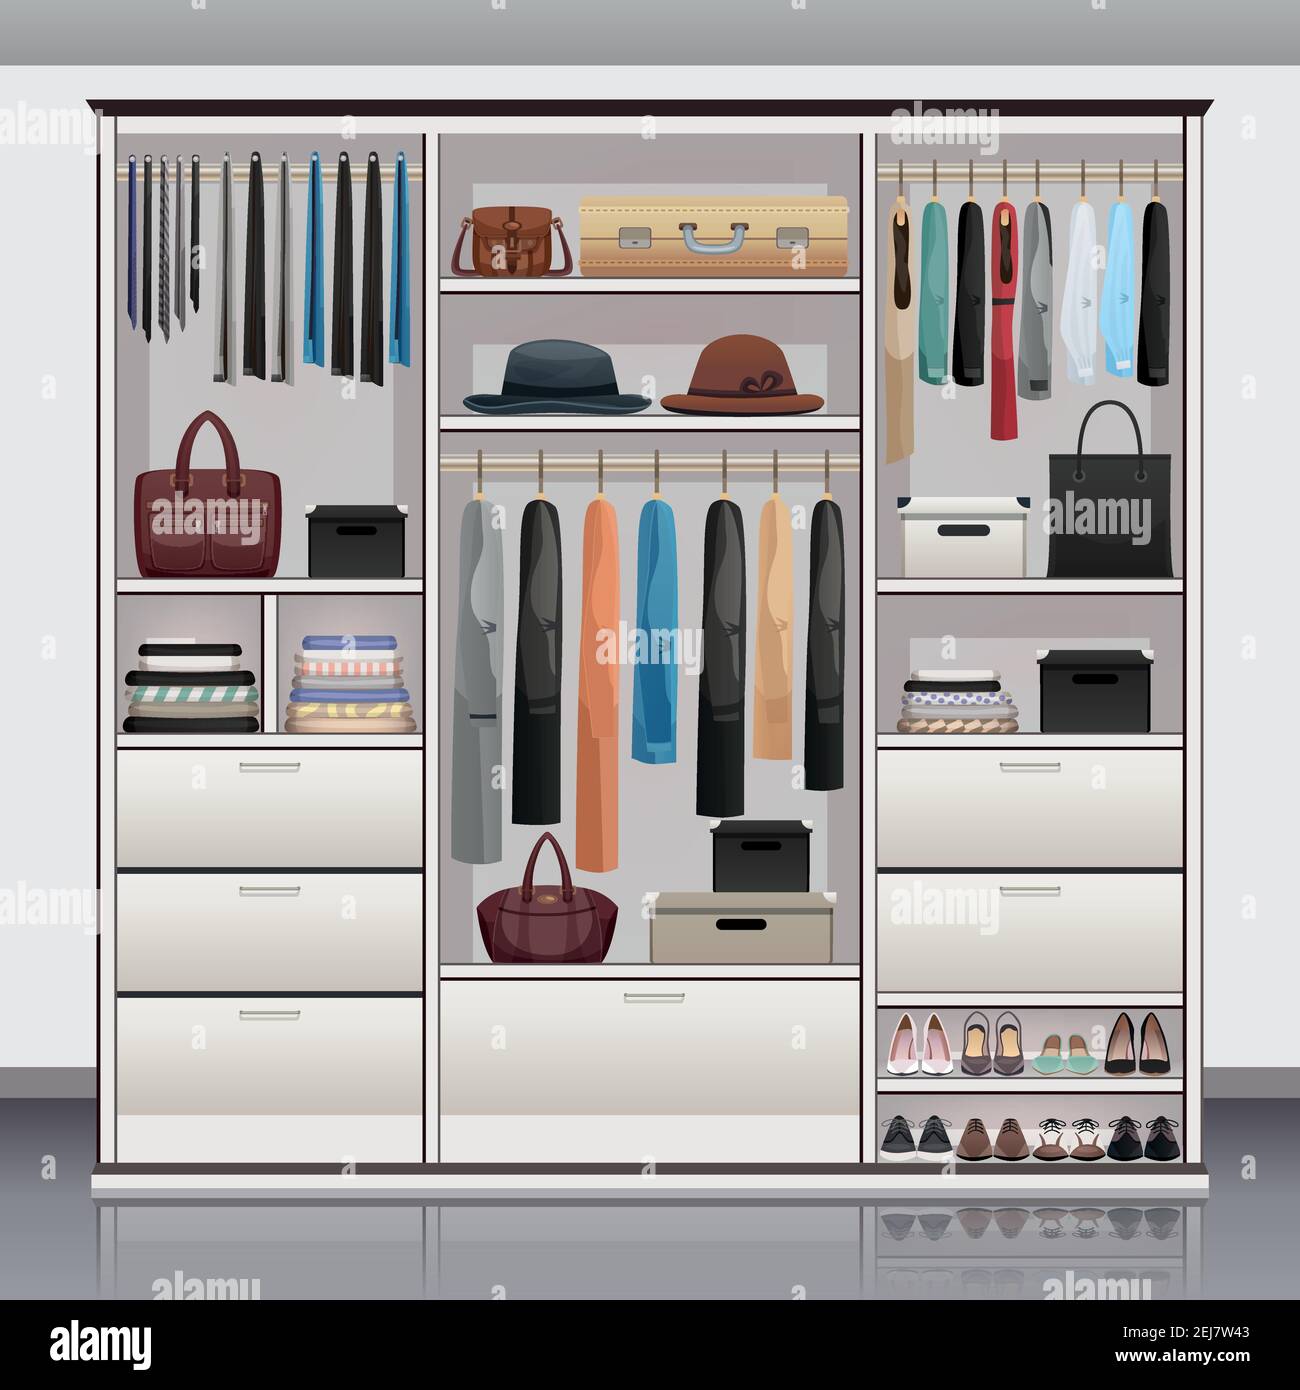 https://c8.alamy.com/comp/2EJ7W43/wardrobe-accessories-storage-with-drawers-organizers-shoe-racks-hanging-rails-for-scarves-neck-ties-realistic-vector-illustration-2EJ7W43.jpg